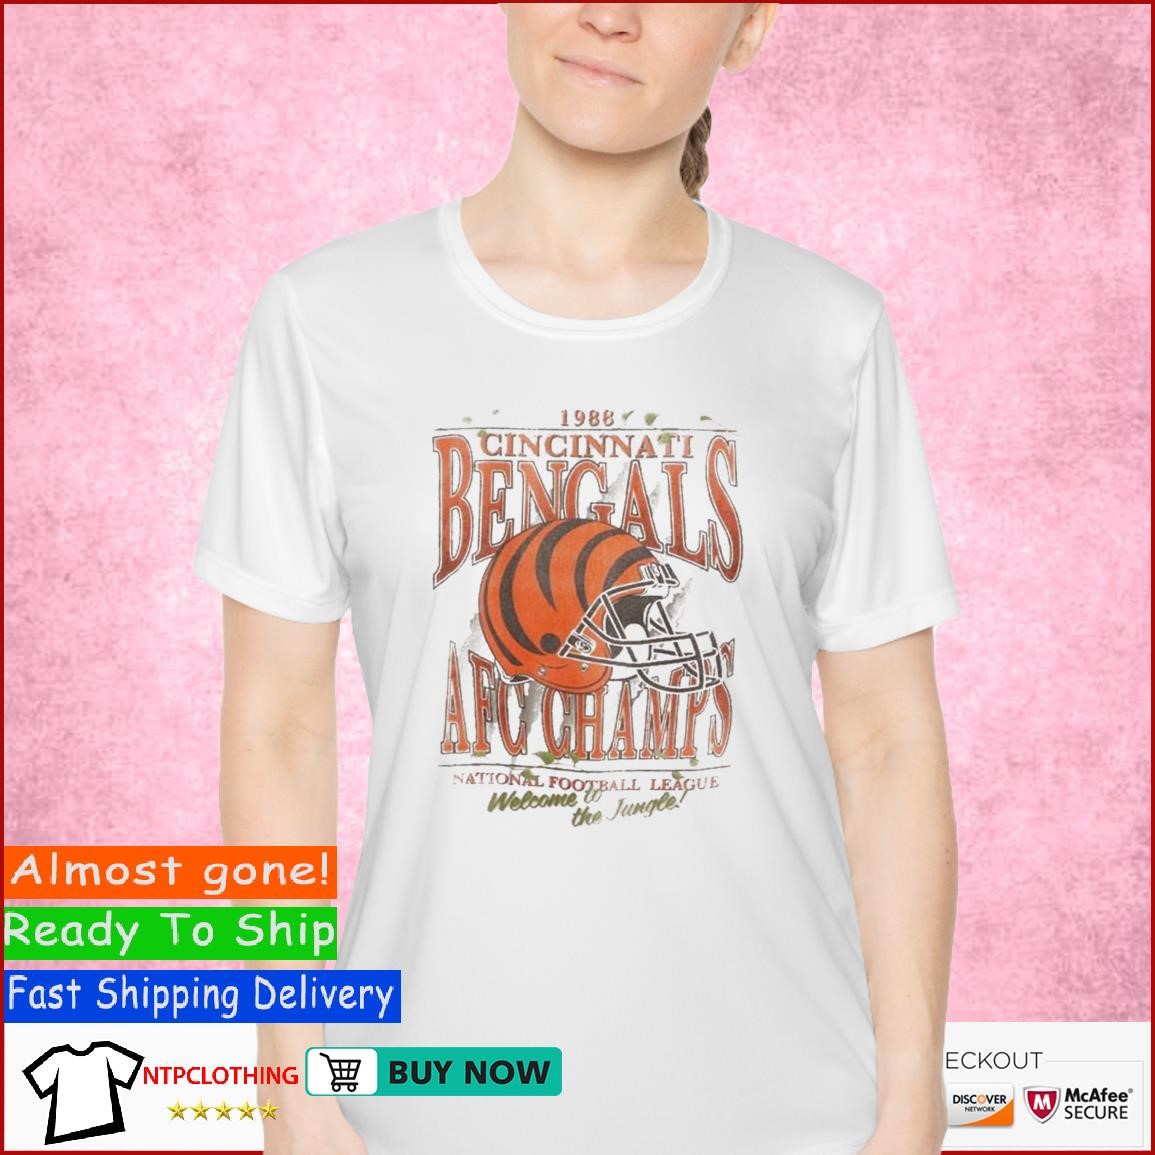 Welcome to the Jungle T-Shirt Kaufen